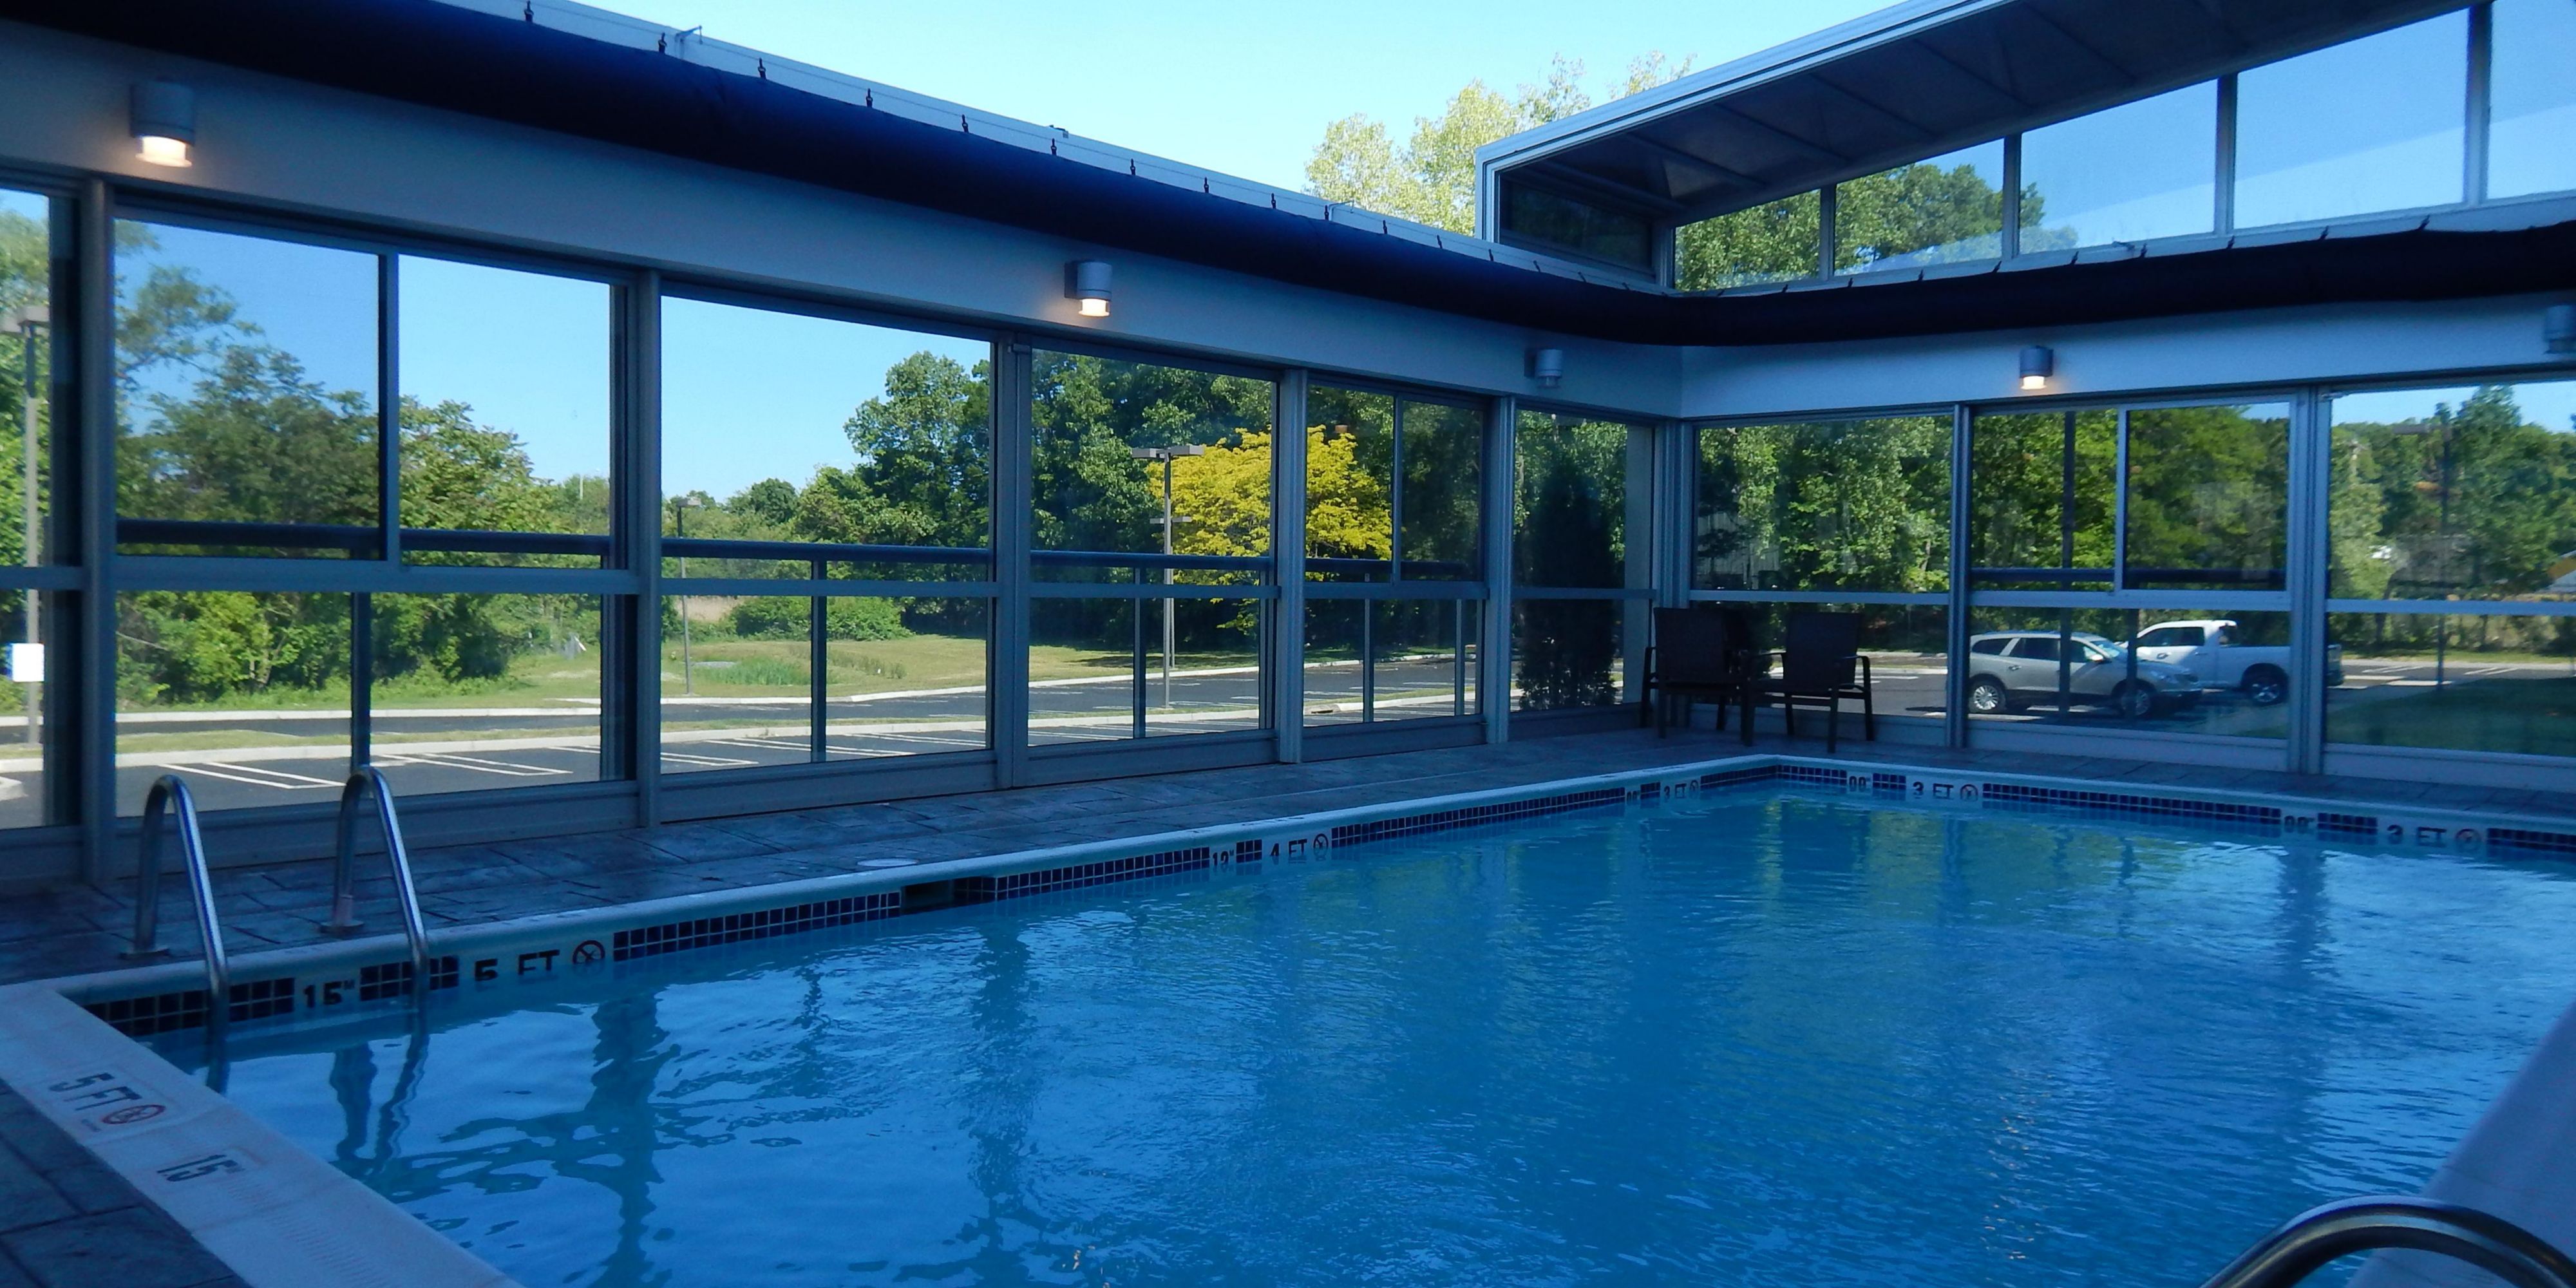 We offer a lovely heated indoor pool with retractable roof for those long days of summer to just relax an afternoon away. Our onsite 24-hour fitness center offers you everything you need to keep your work out routine on track while away from home. 